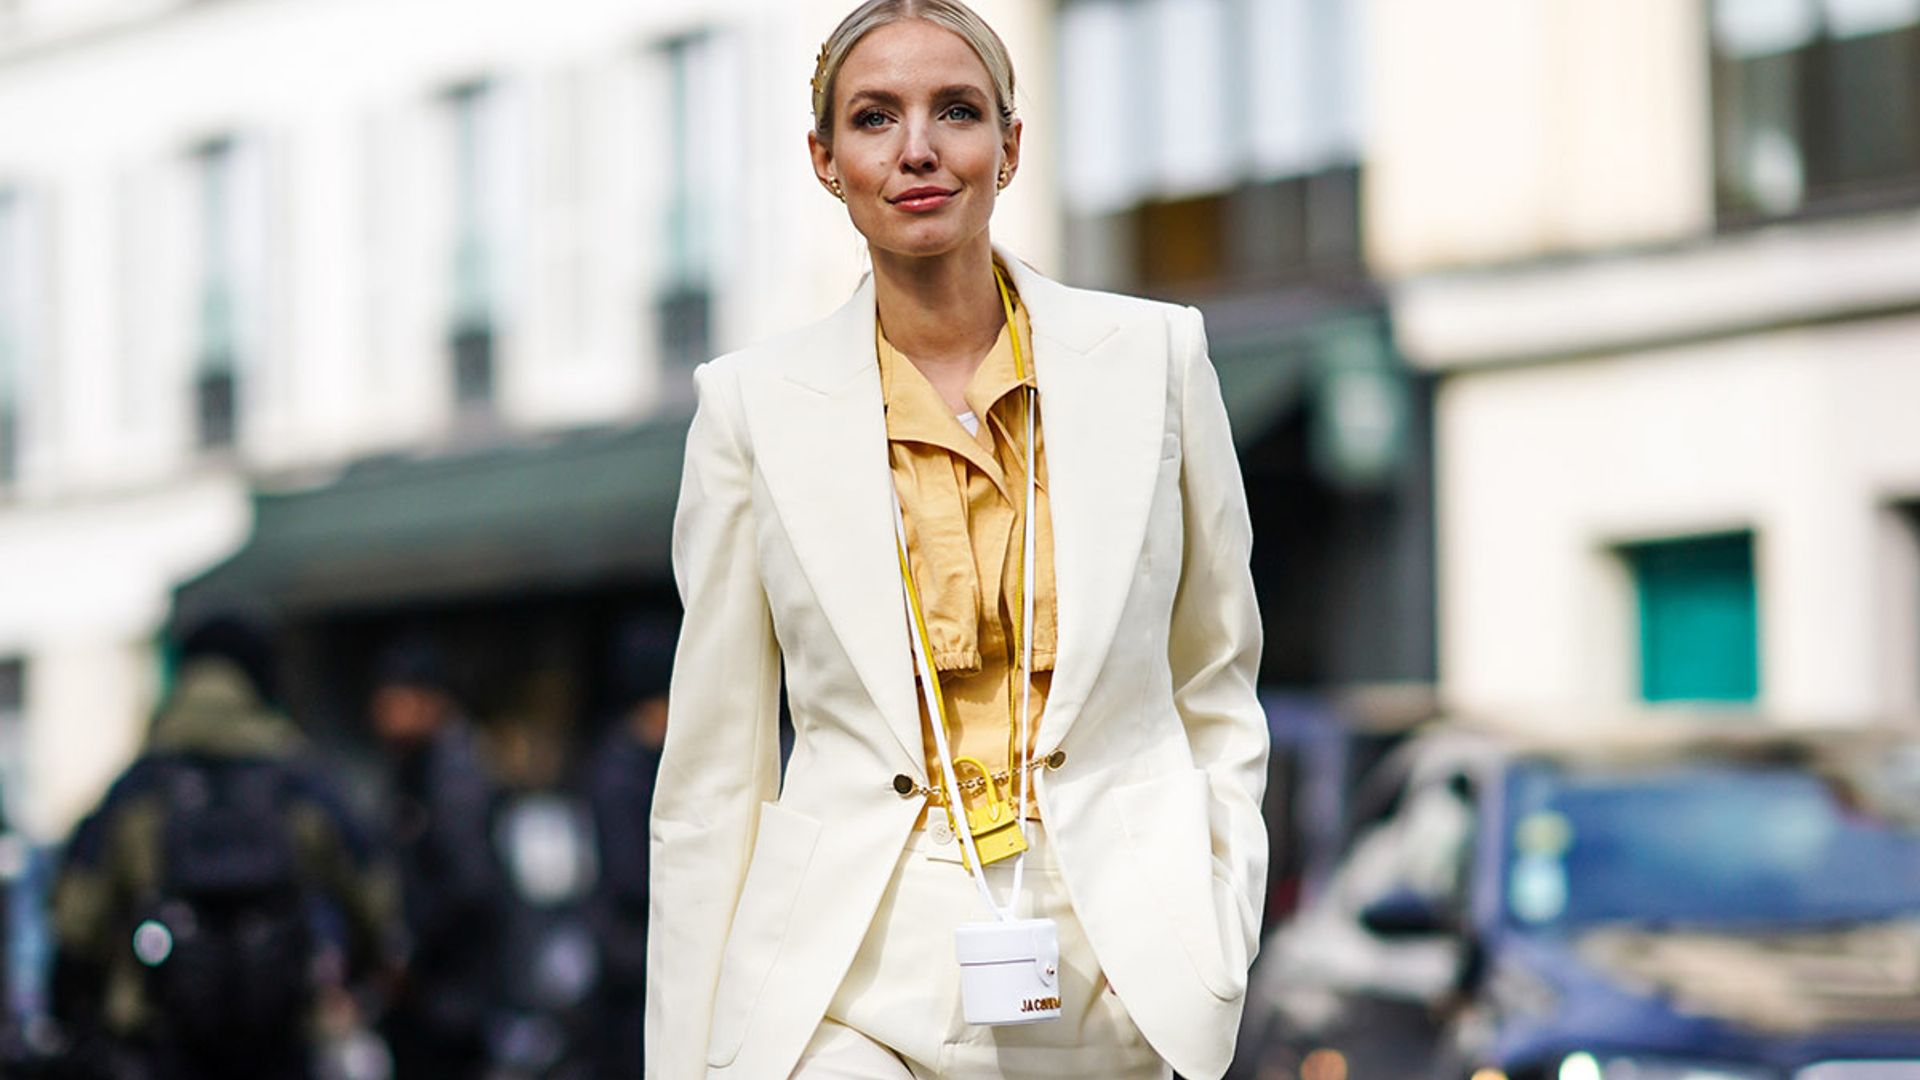 7 interview outfit ideas according to an HR specialist AND a chic fashion stylist